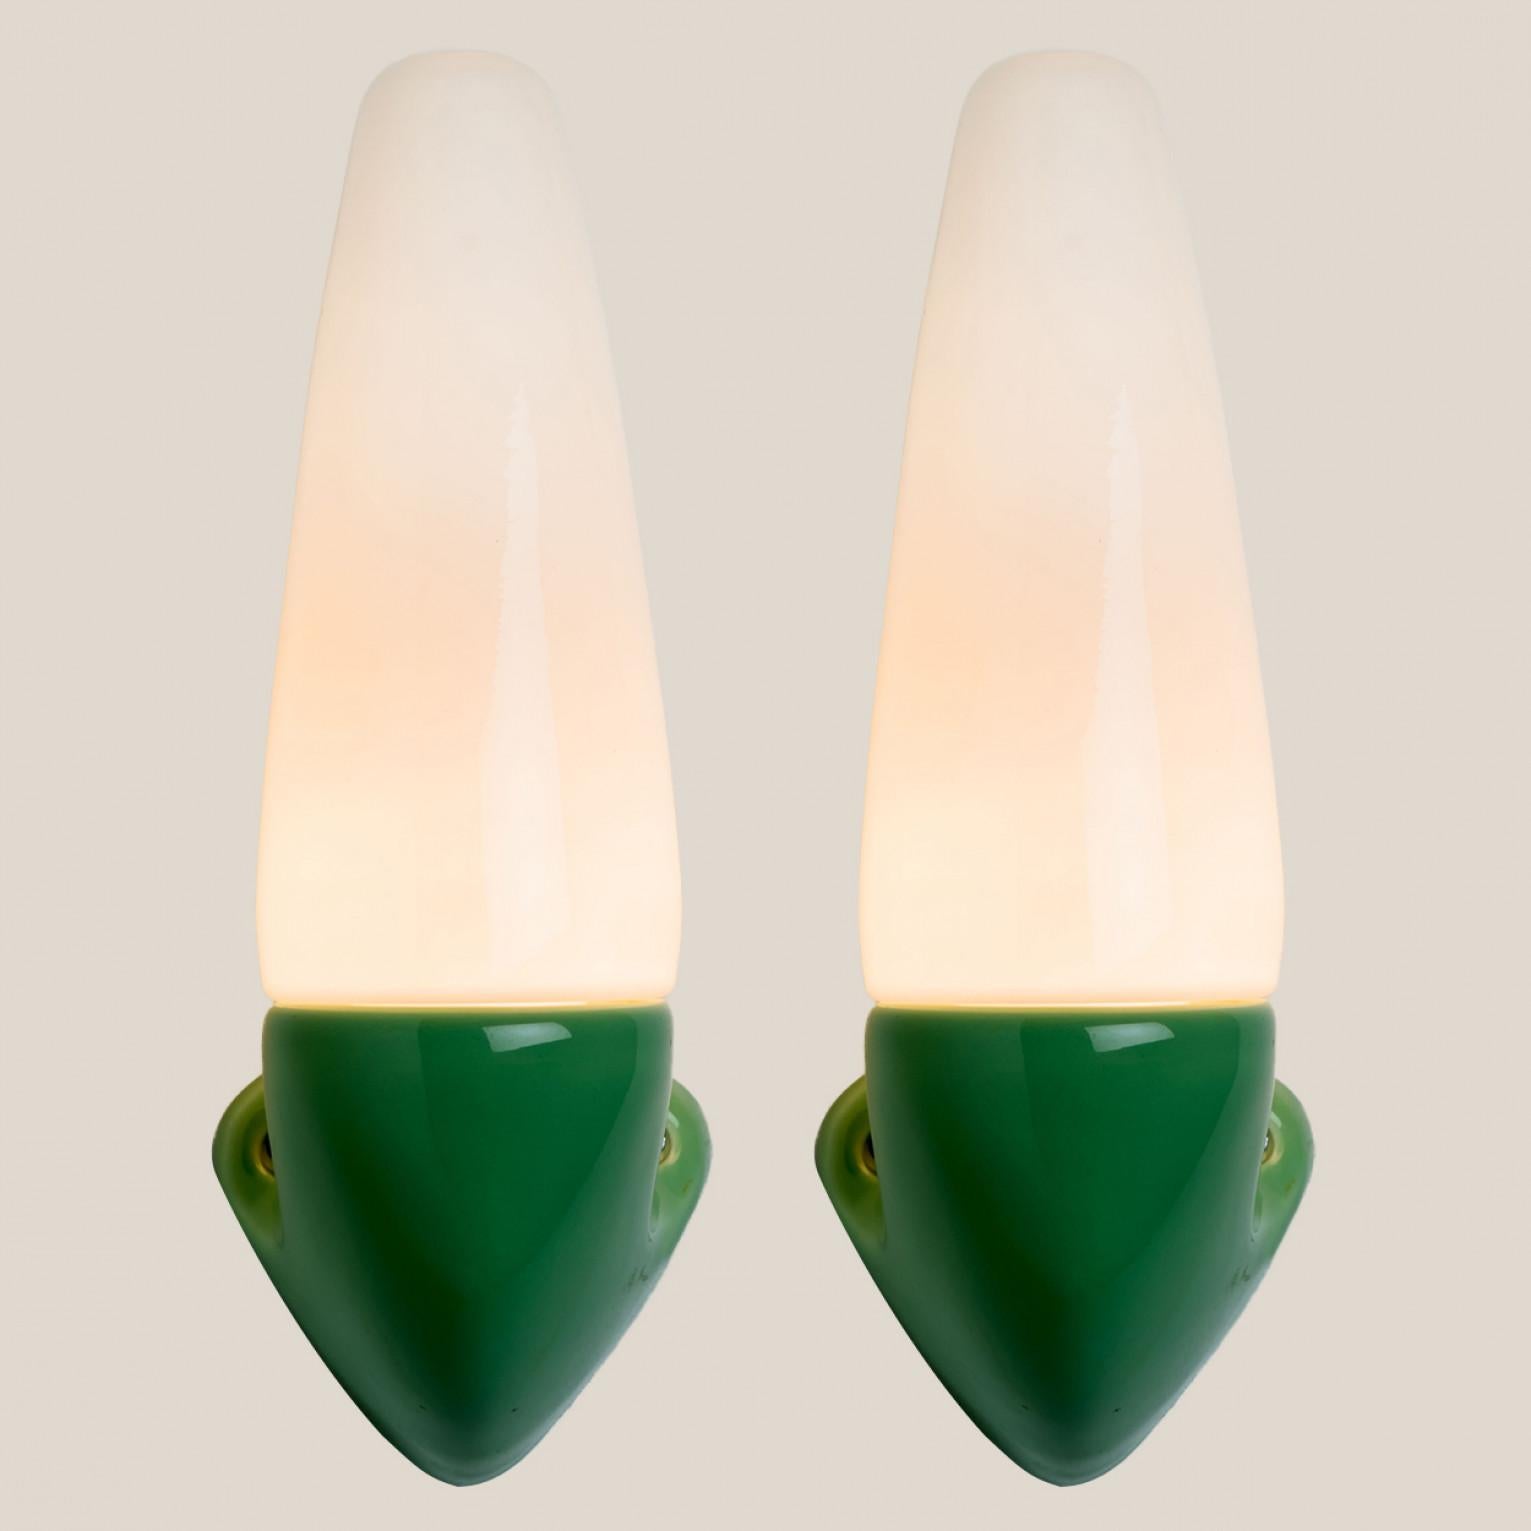 Pair of stunning wall lights, made by Sigvard Bernadotte around the 70s. The lights are made of a white cone-like glass cups, held up by a green ceramic handle, creating a classy and stylish effect.



'Design Prince' Sigvard Bernadotte was a